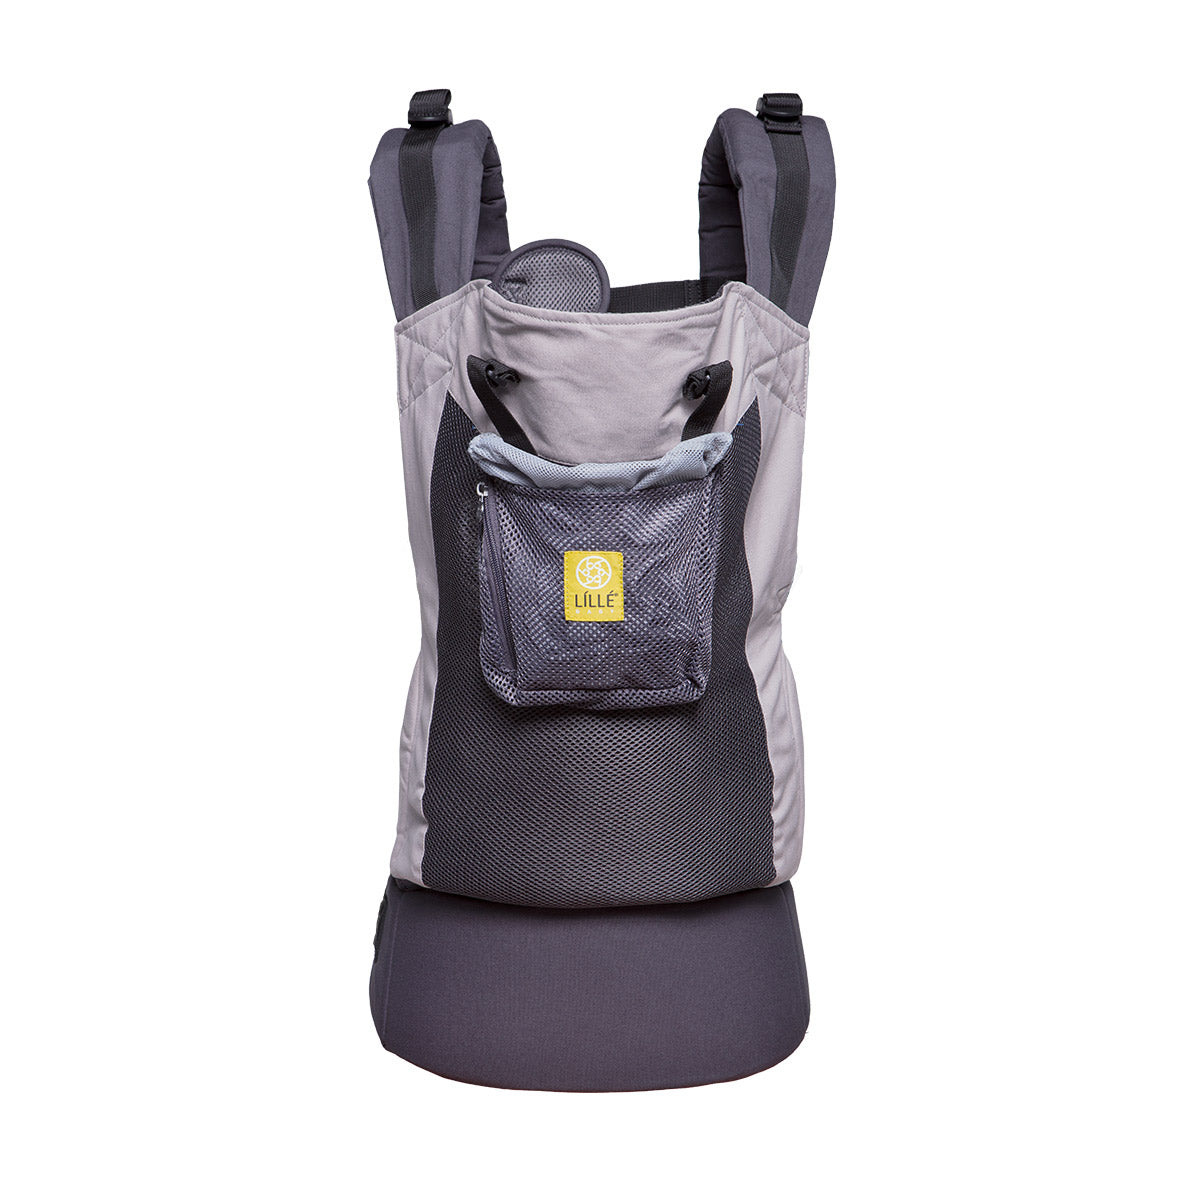 Toddler Carrier CarryOn Airflow in Charcoal Silver